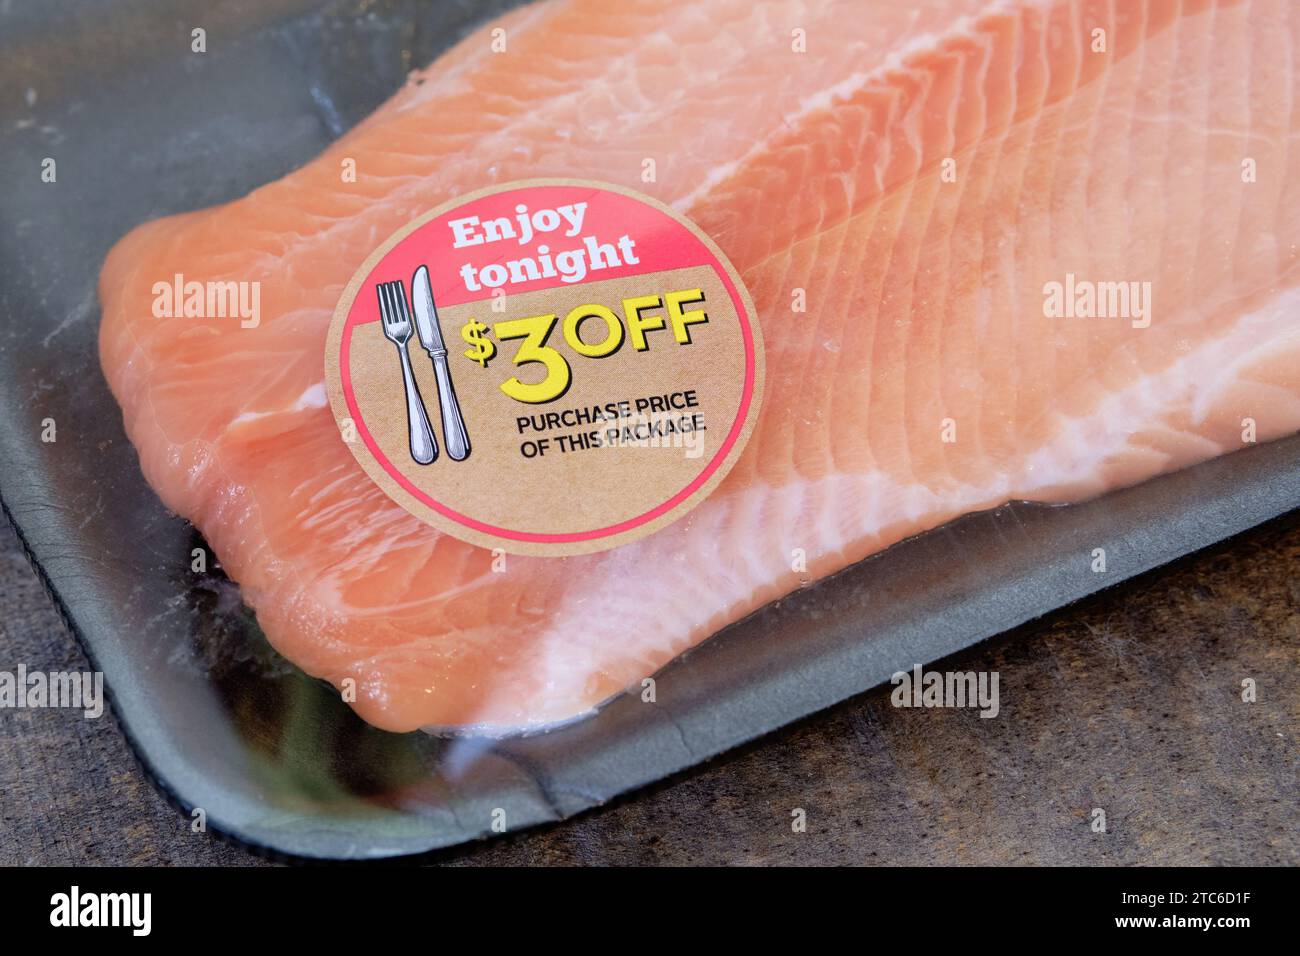 Fish filet with sticker $3 off 'Enjoy Tonight' selling produce before best before date Stock Photo